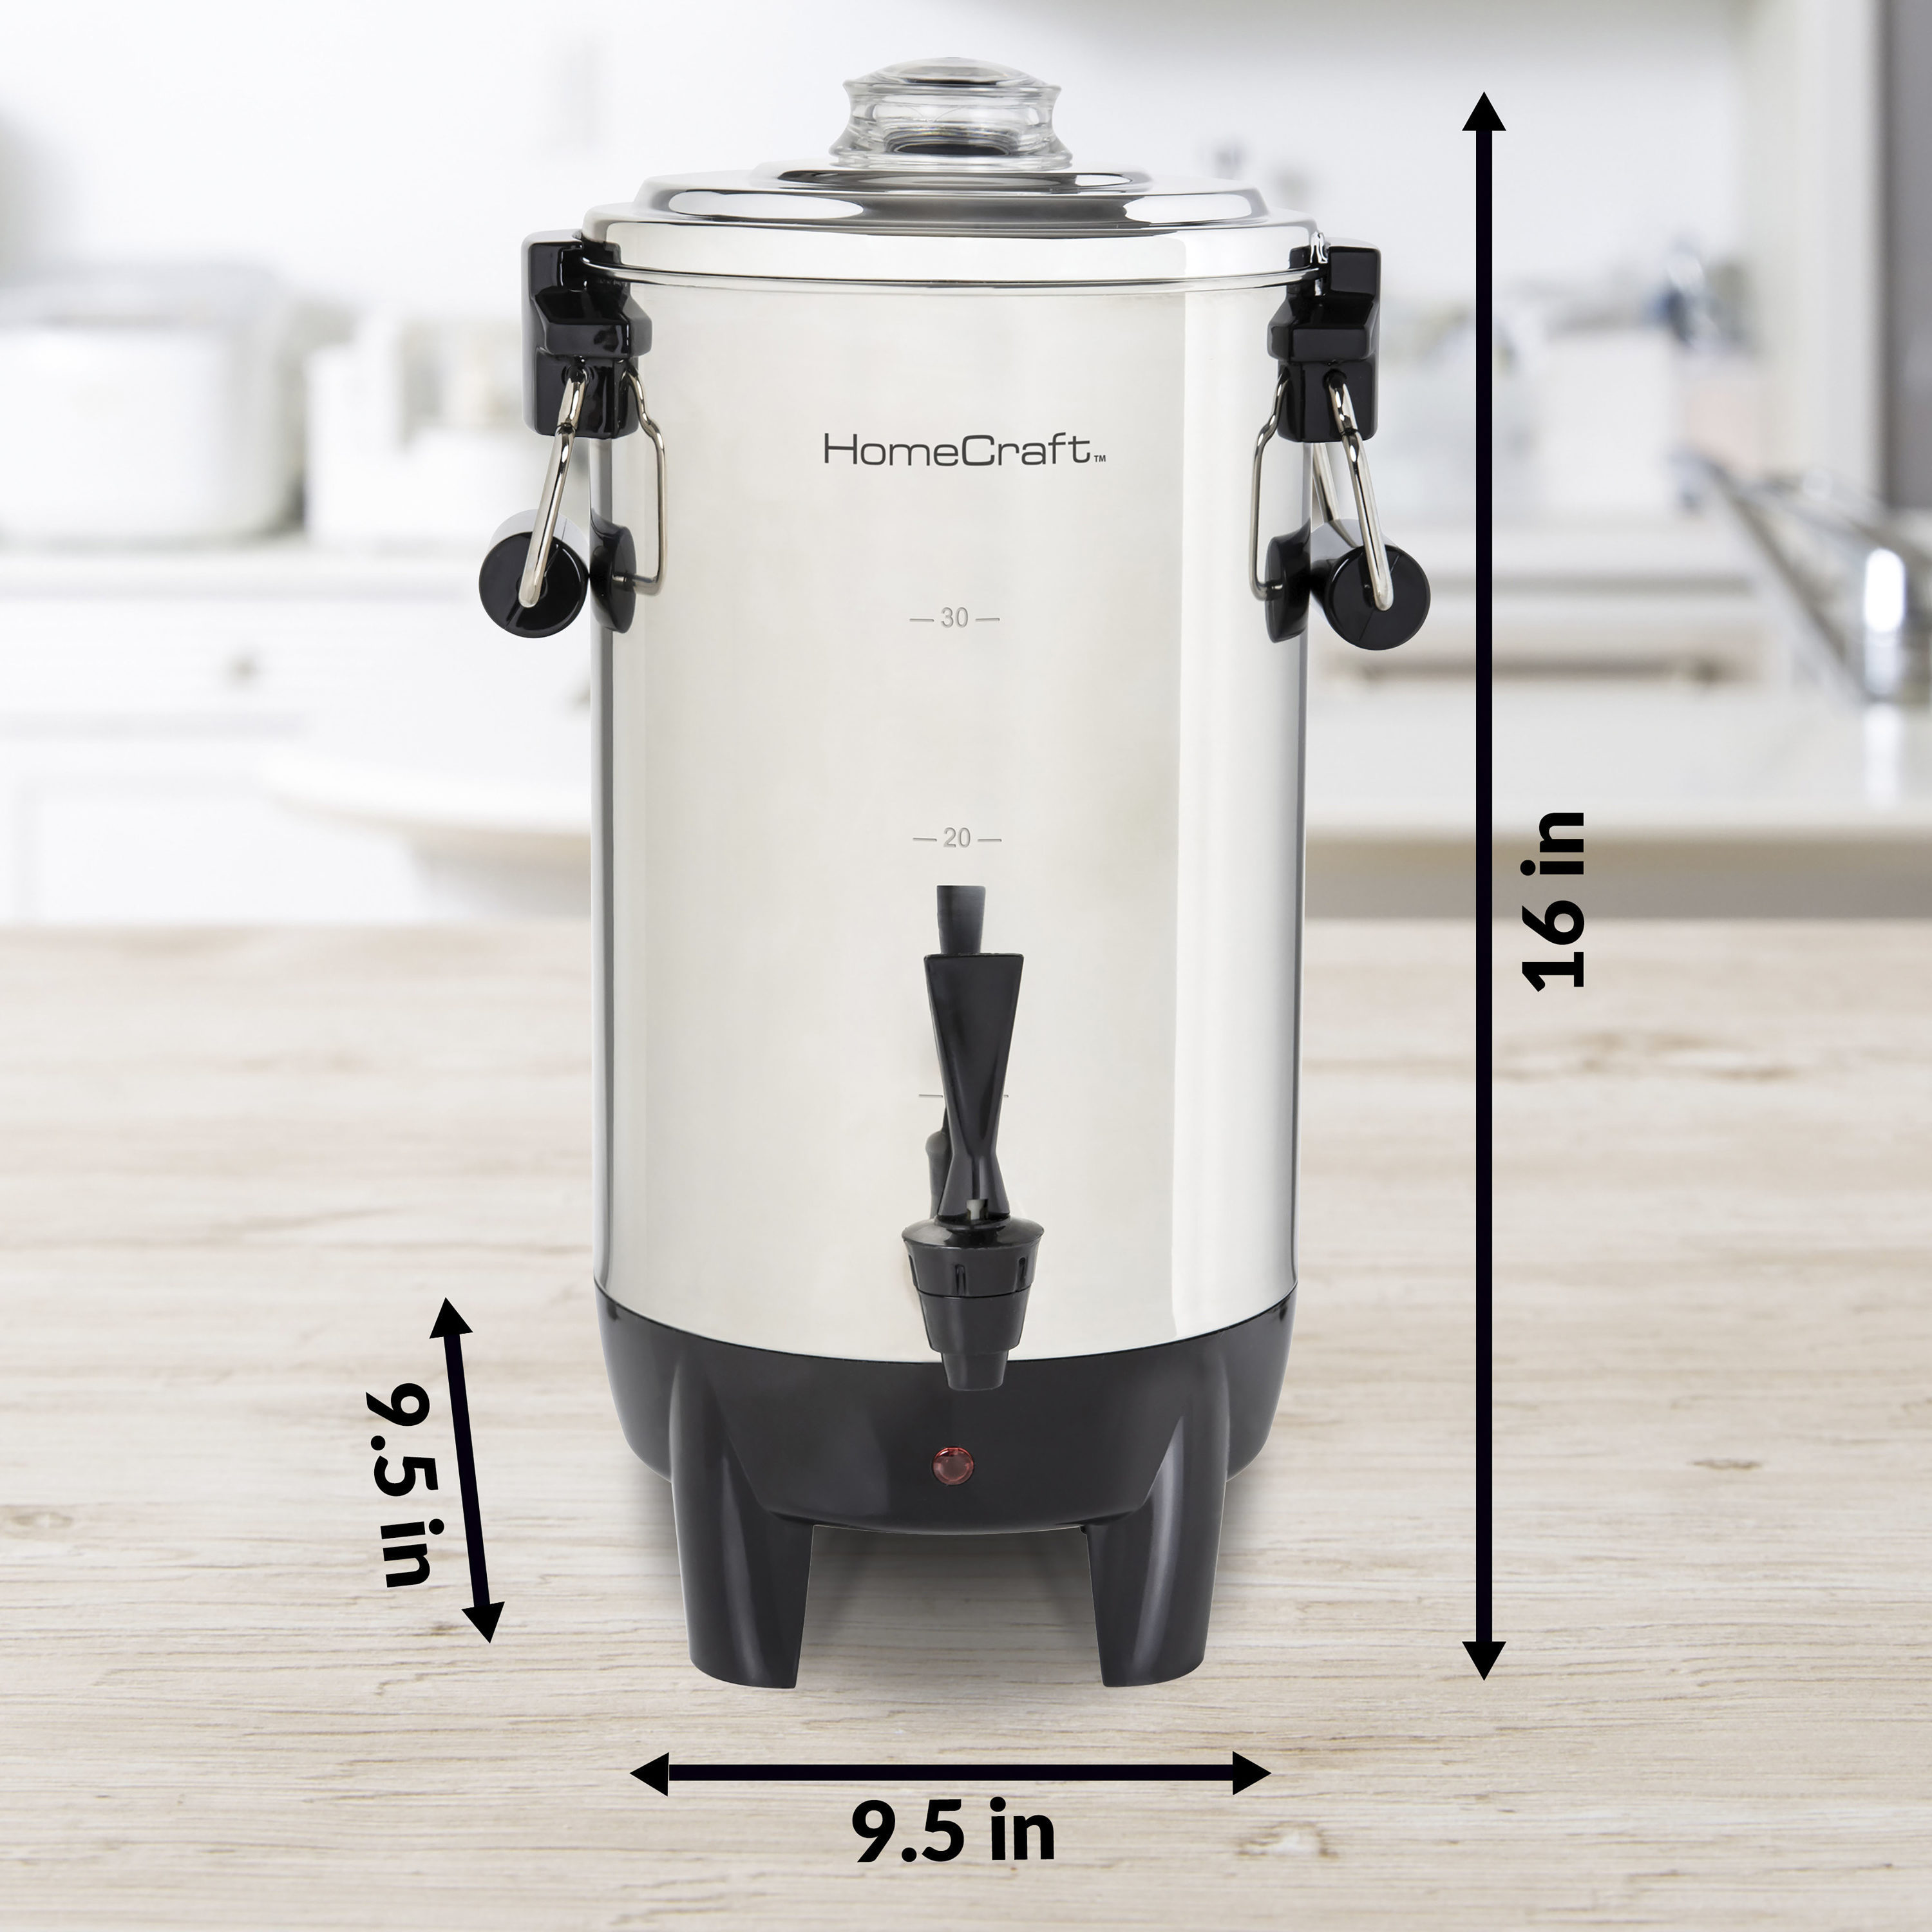 HomeCraft 30-Cup Stainless Steel Residential Coffee Urn in the Coffee  Makers department at